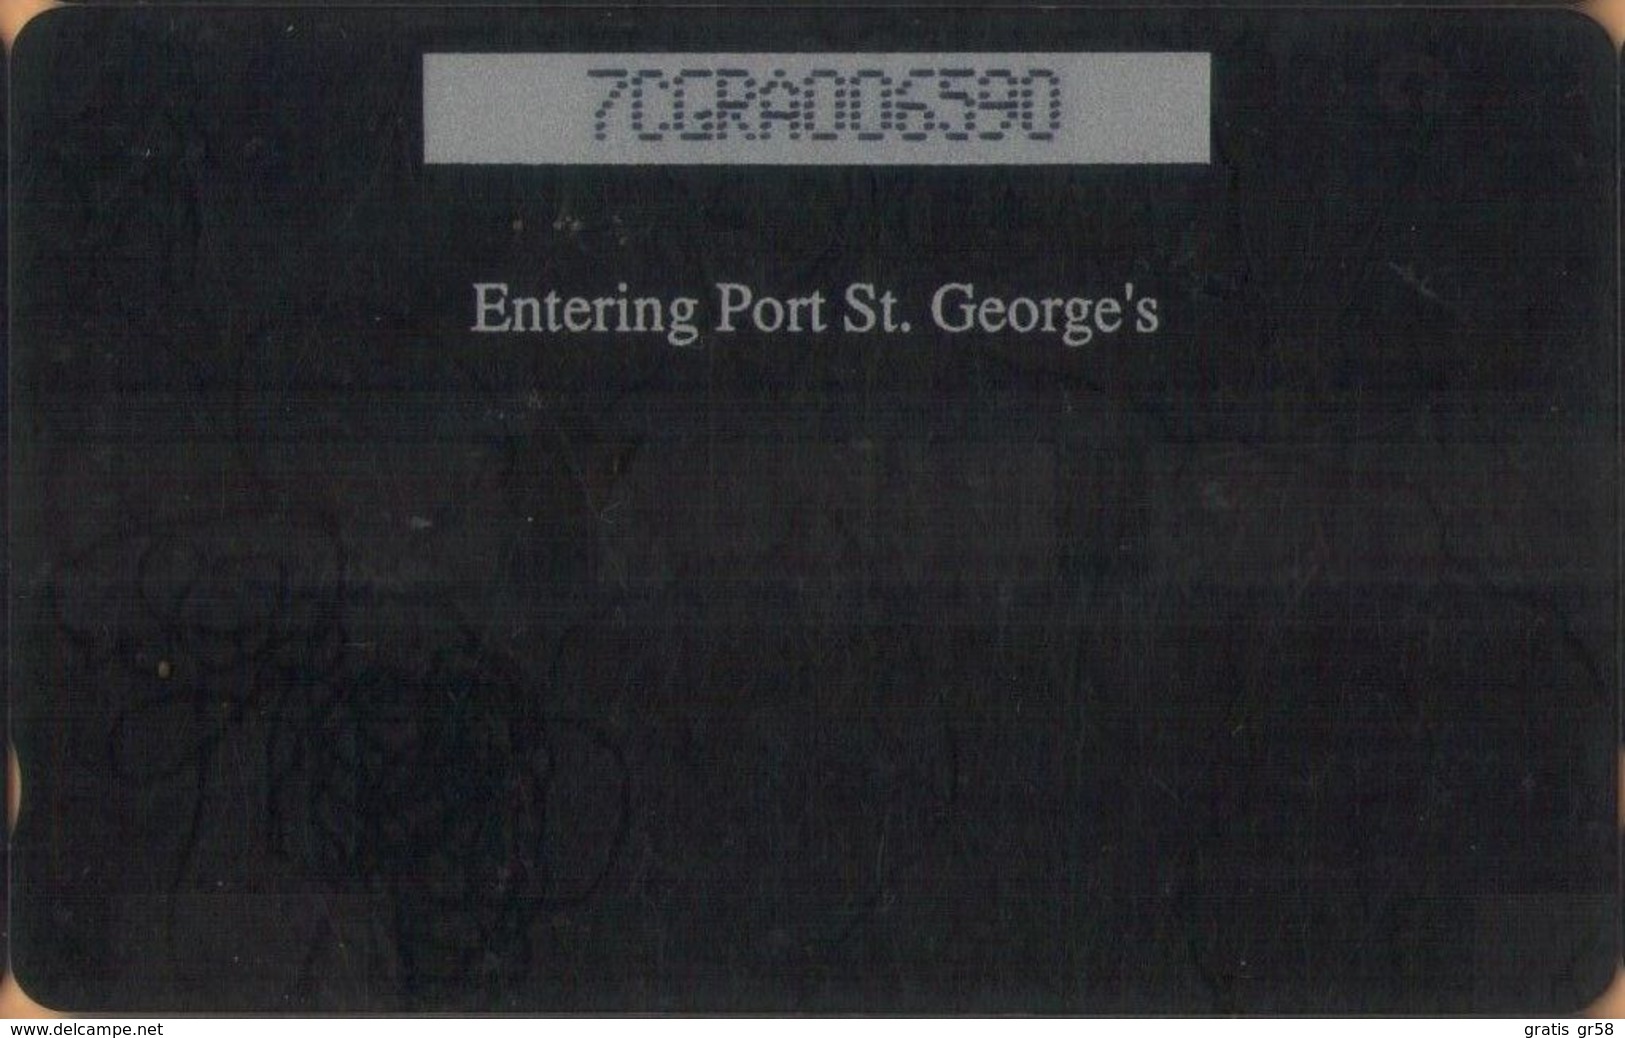 Grenada - GPT, GRE-7A, 7CGRA, Port St Georges, 10 EC$, Ports, 10,000ex, 1993, Used As Scan - Grenade